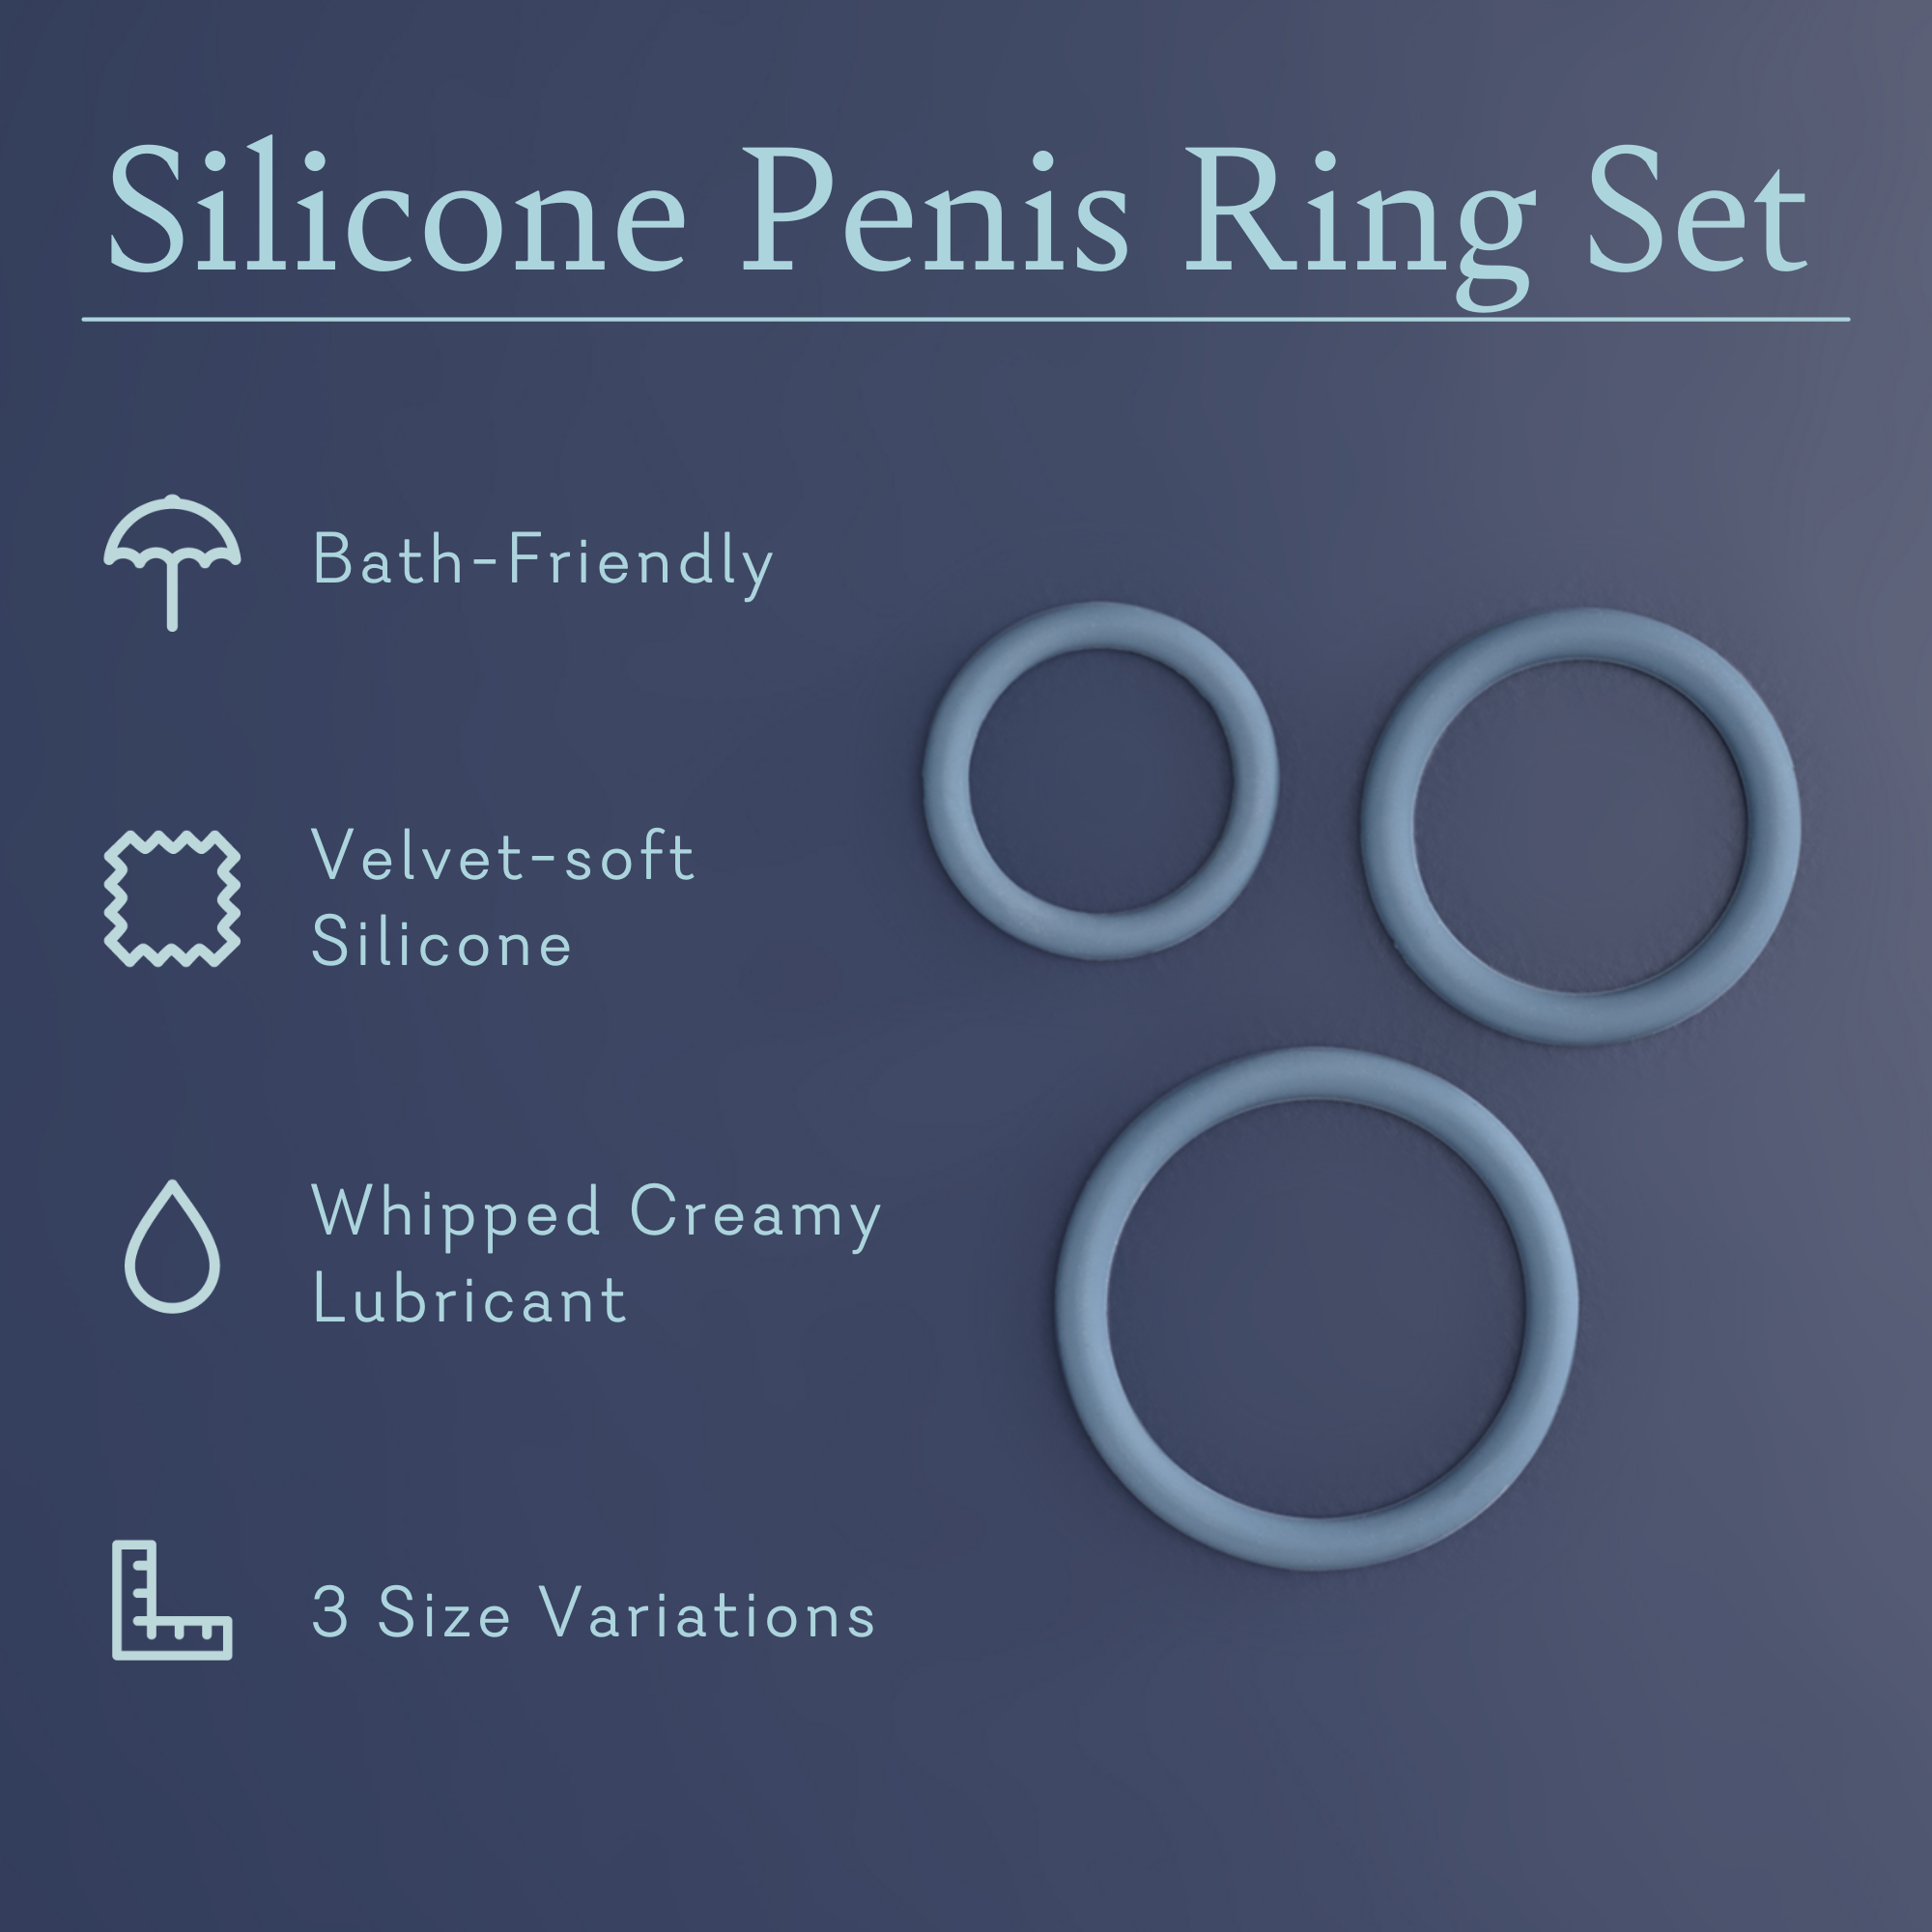 3 Benefits Of Using A Penis Ring